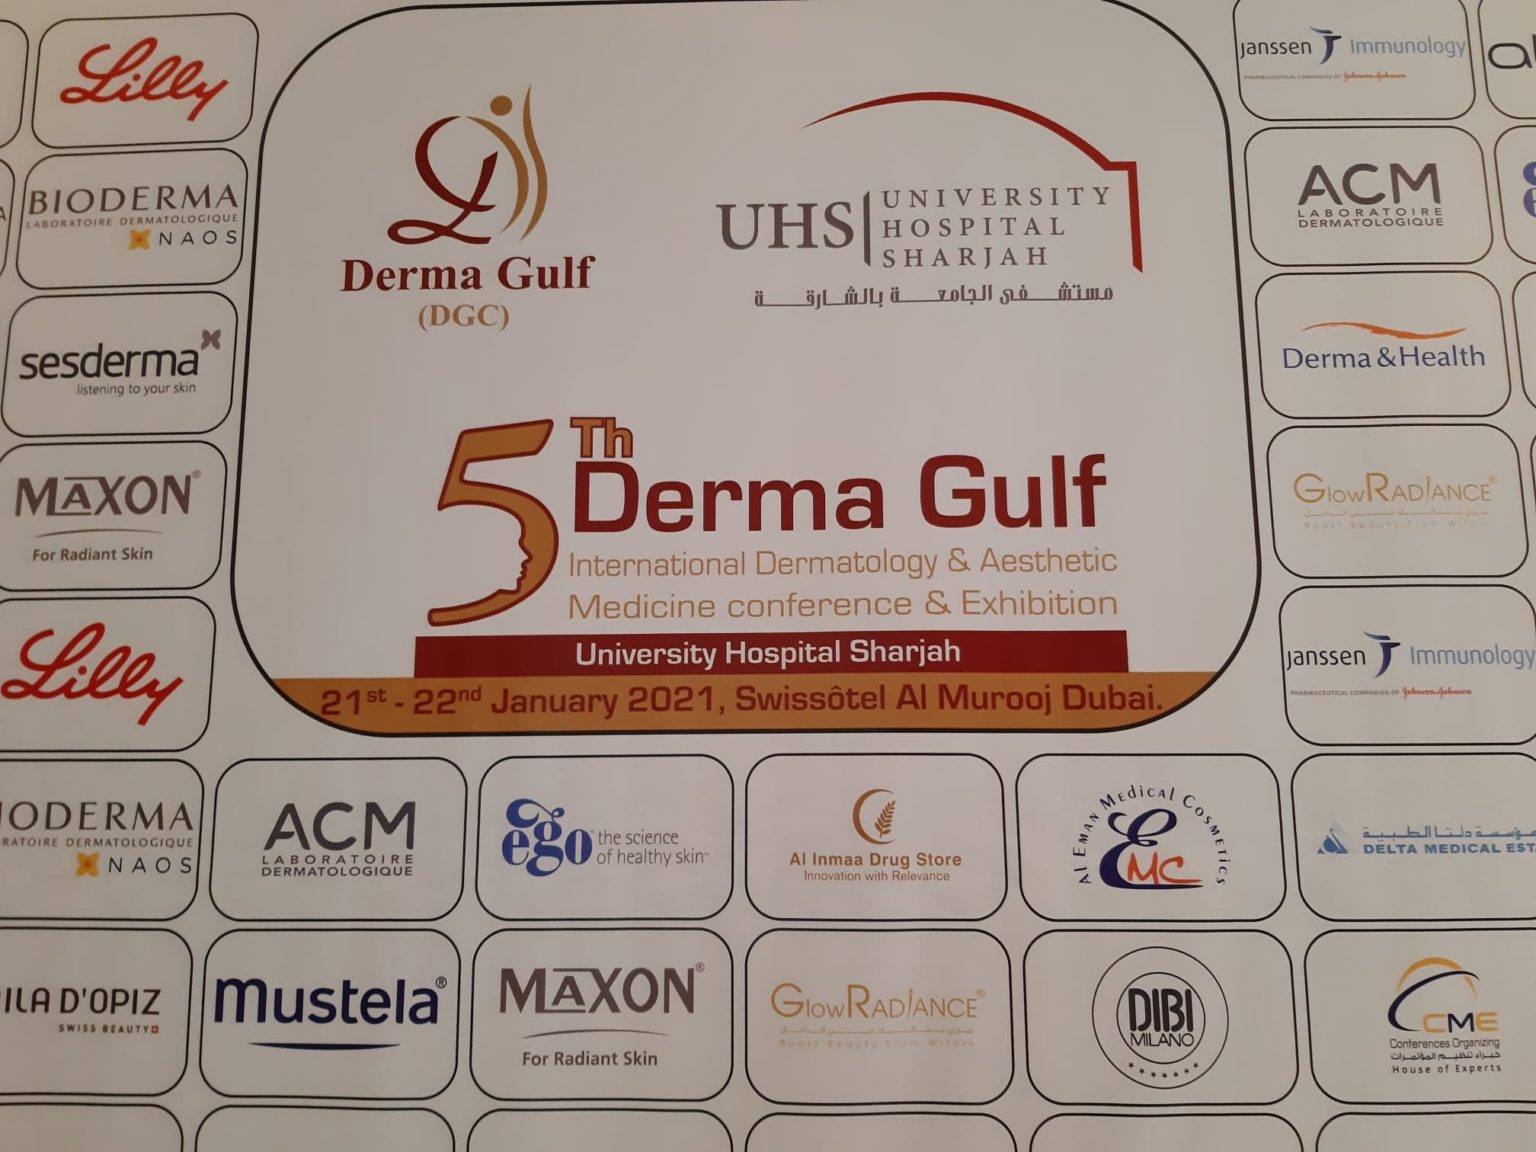 DERMA GULF 5TH INTERNATIONAL DERMATOLOGY & AESTHETIC MEDICINE CONFERENCE AND EXHIBITION